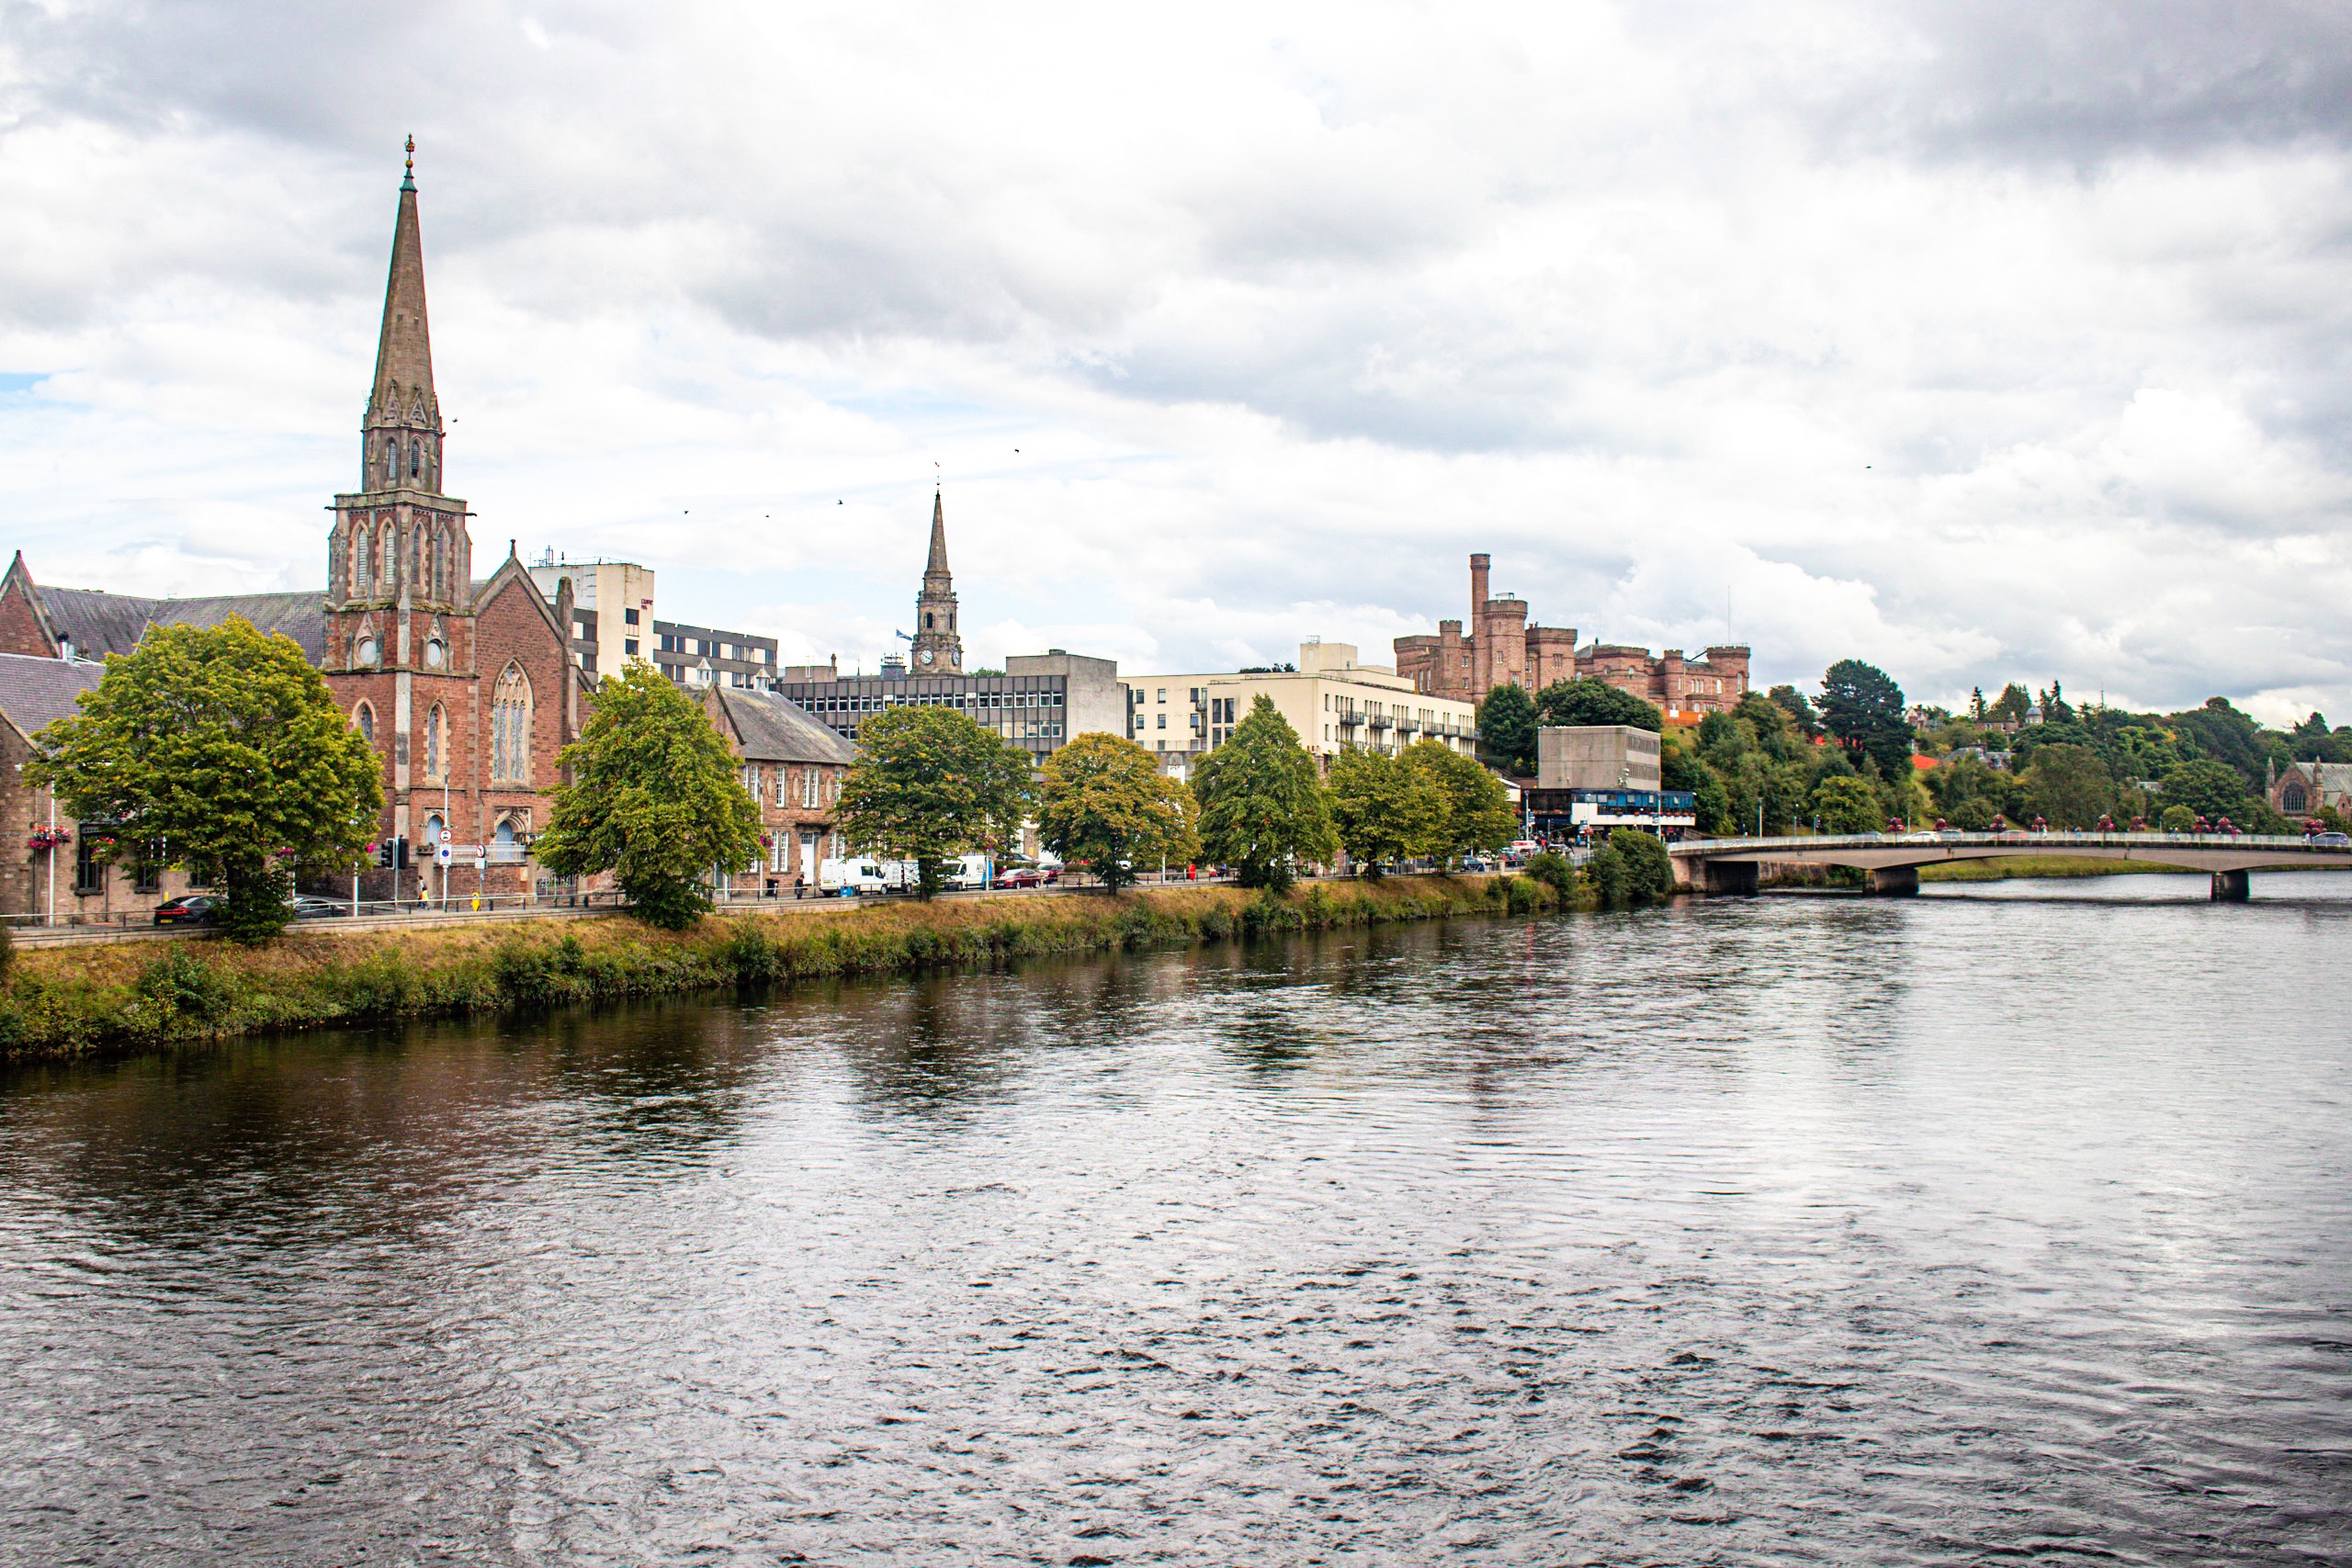 View of Inverness, Scotland